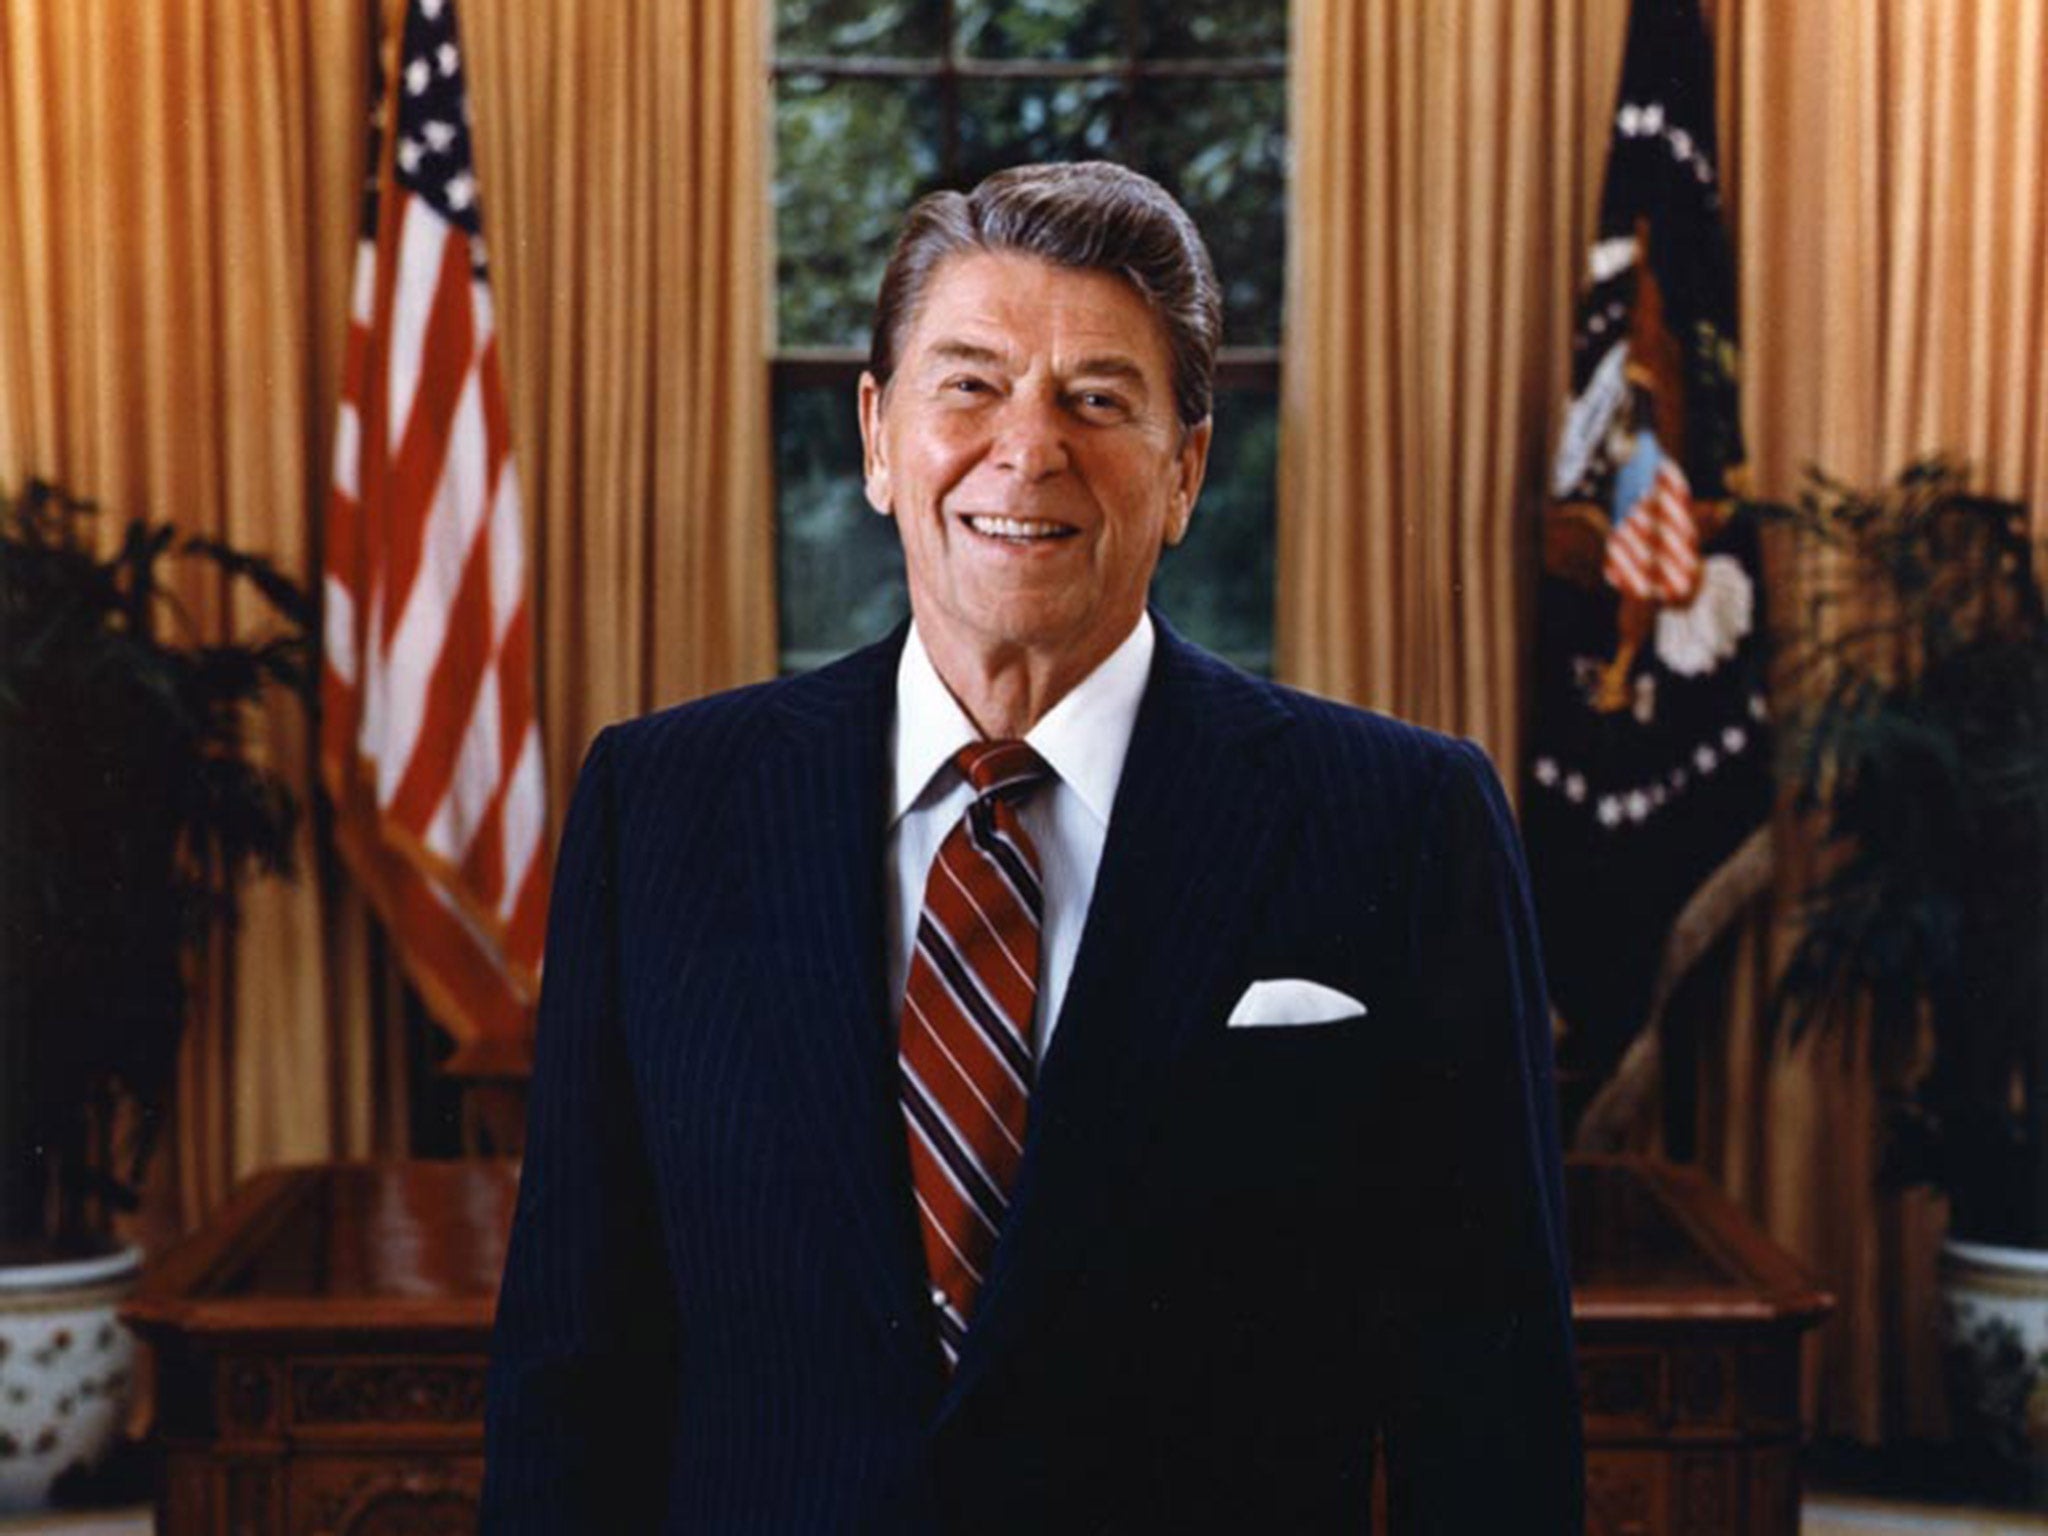 Ronald Reagan was the last president to be targeted by an assassin